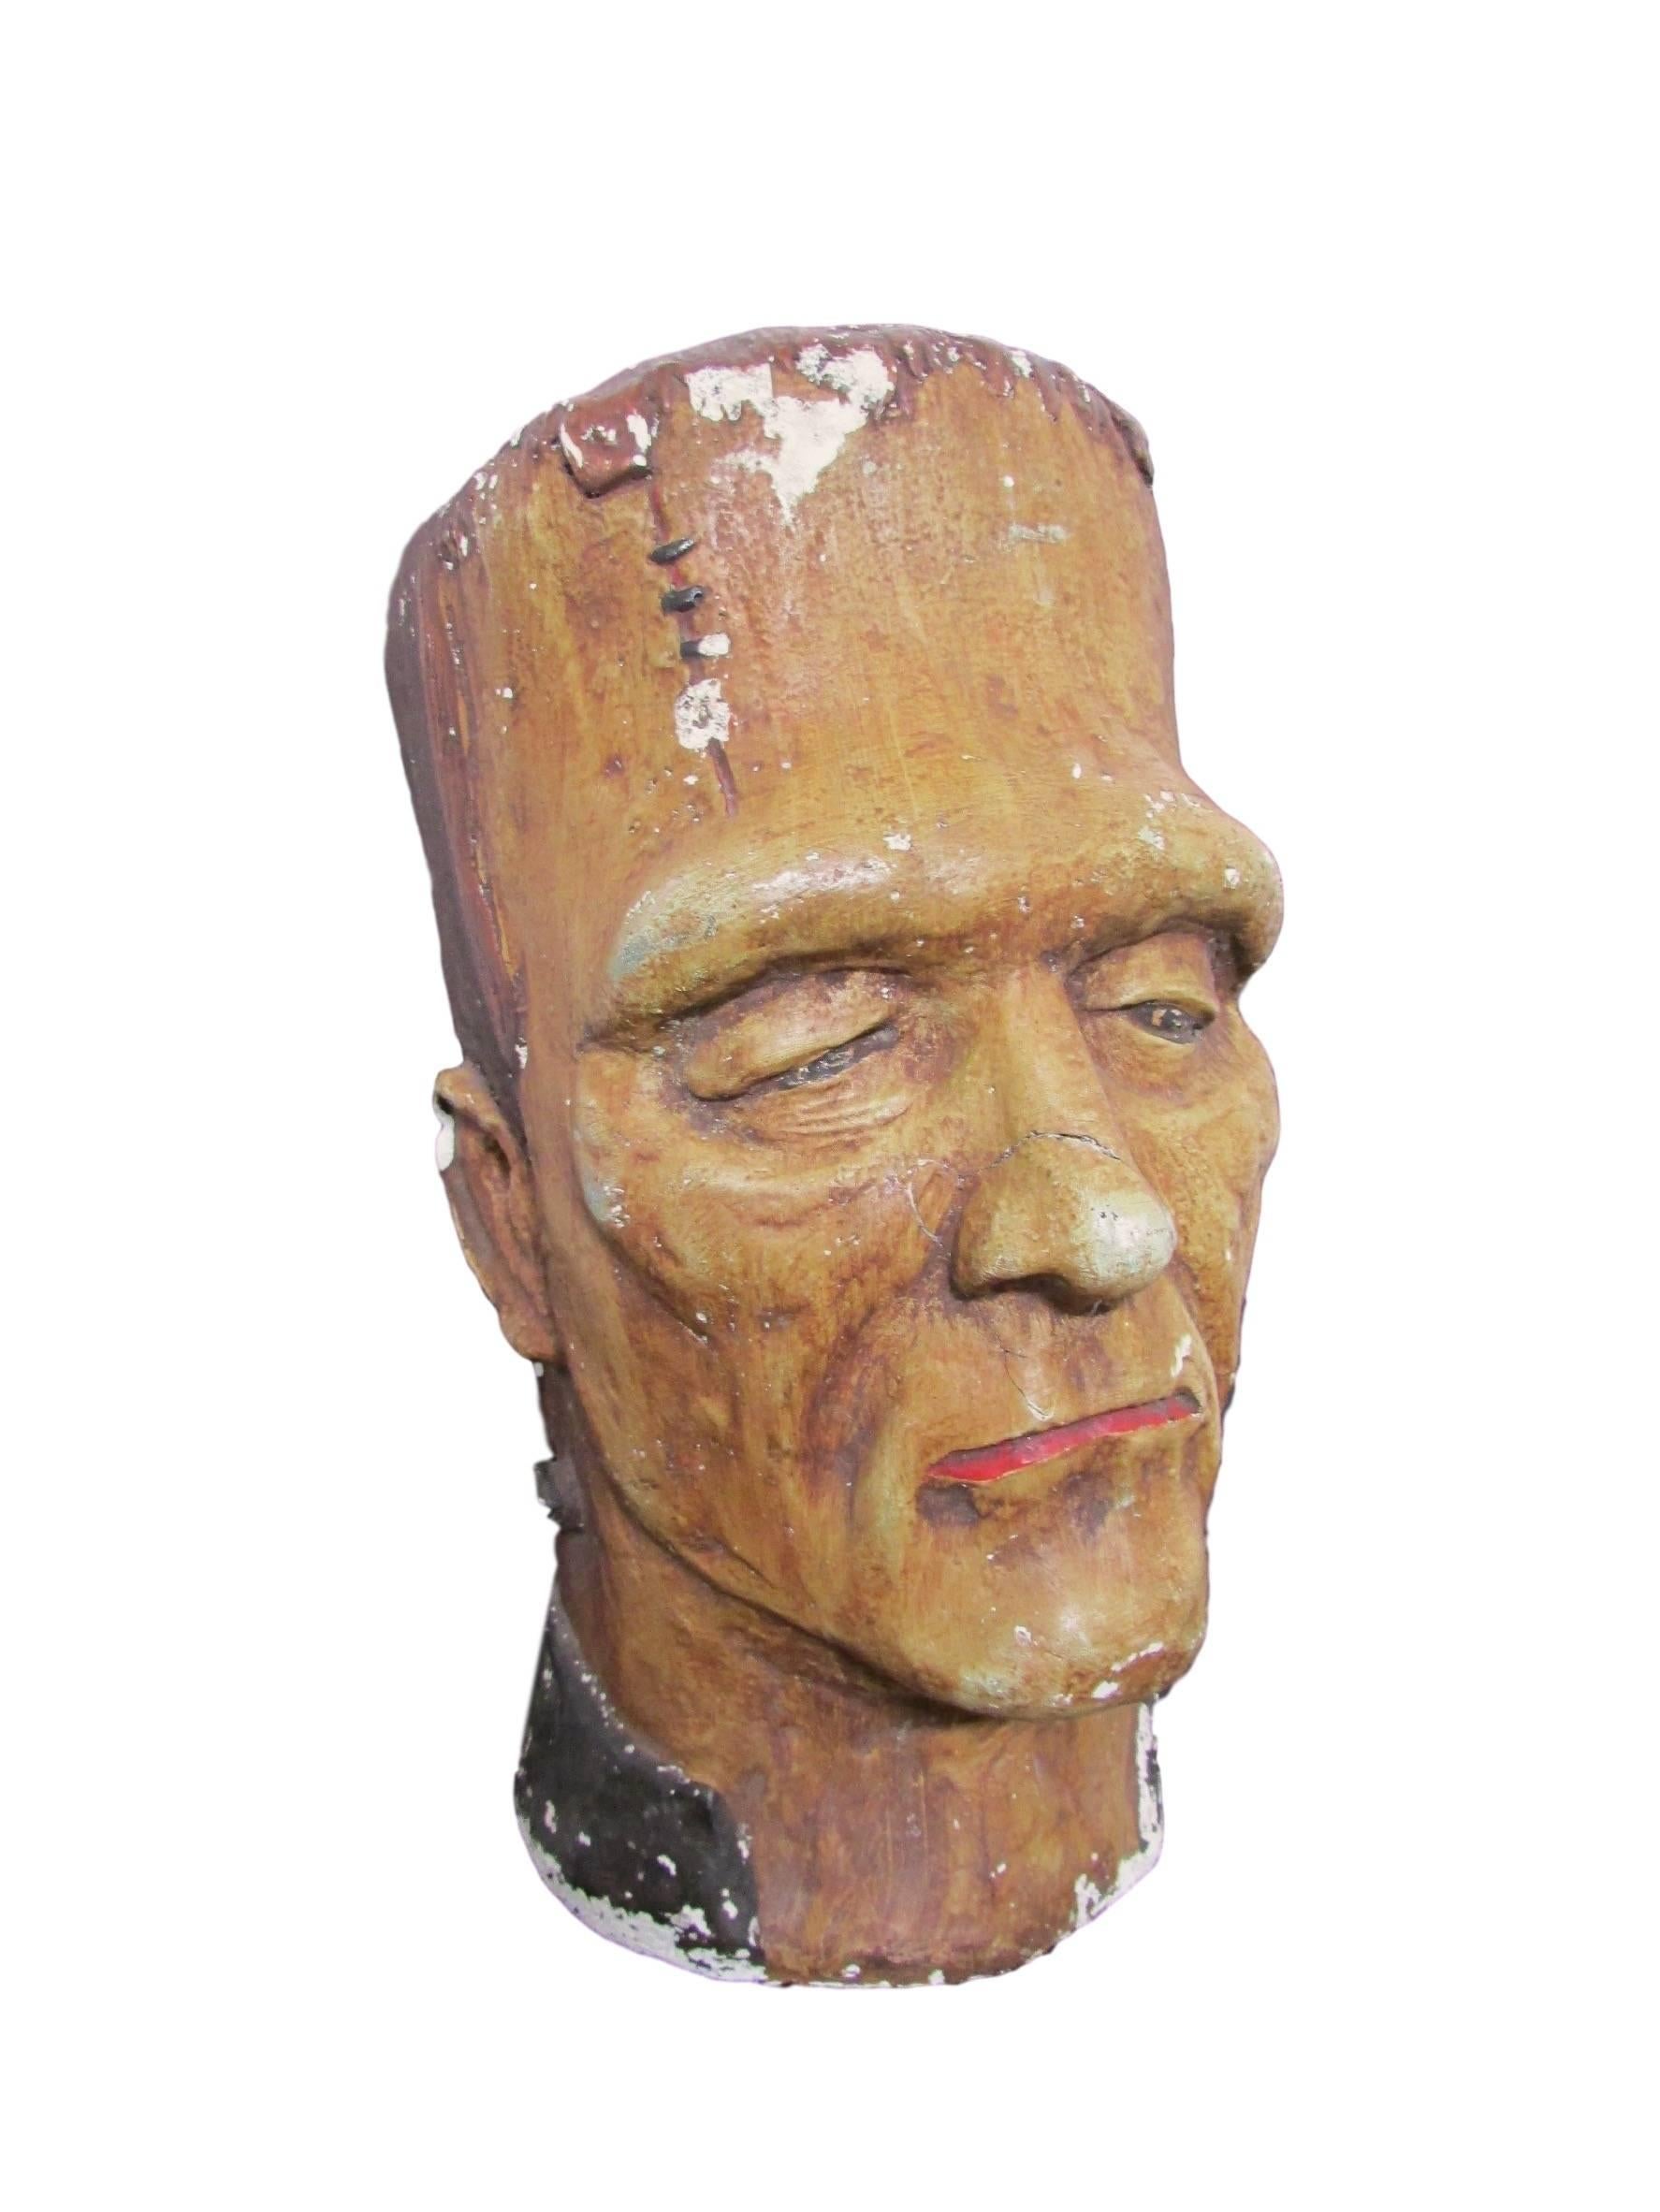 This is a legit scary chalkware bust of Frankenstein circa 1930 used by a theater as an advertising prop. 